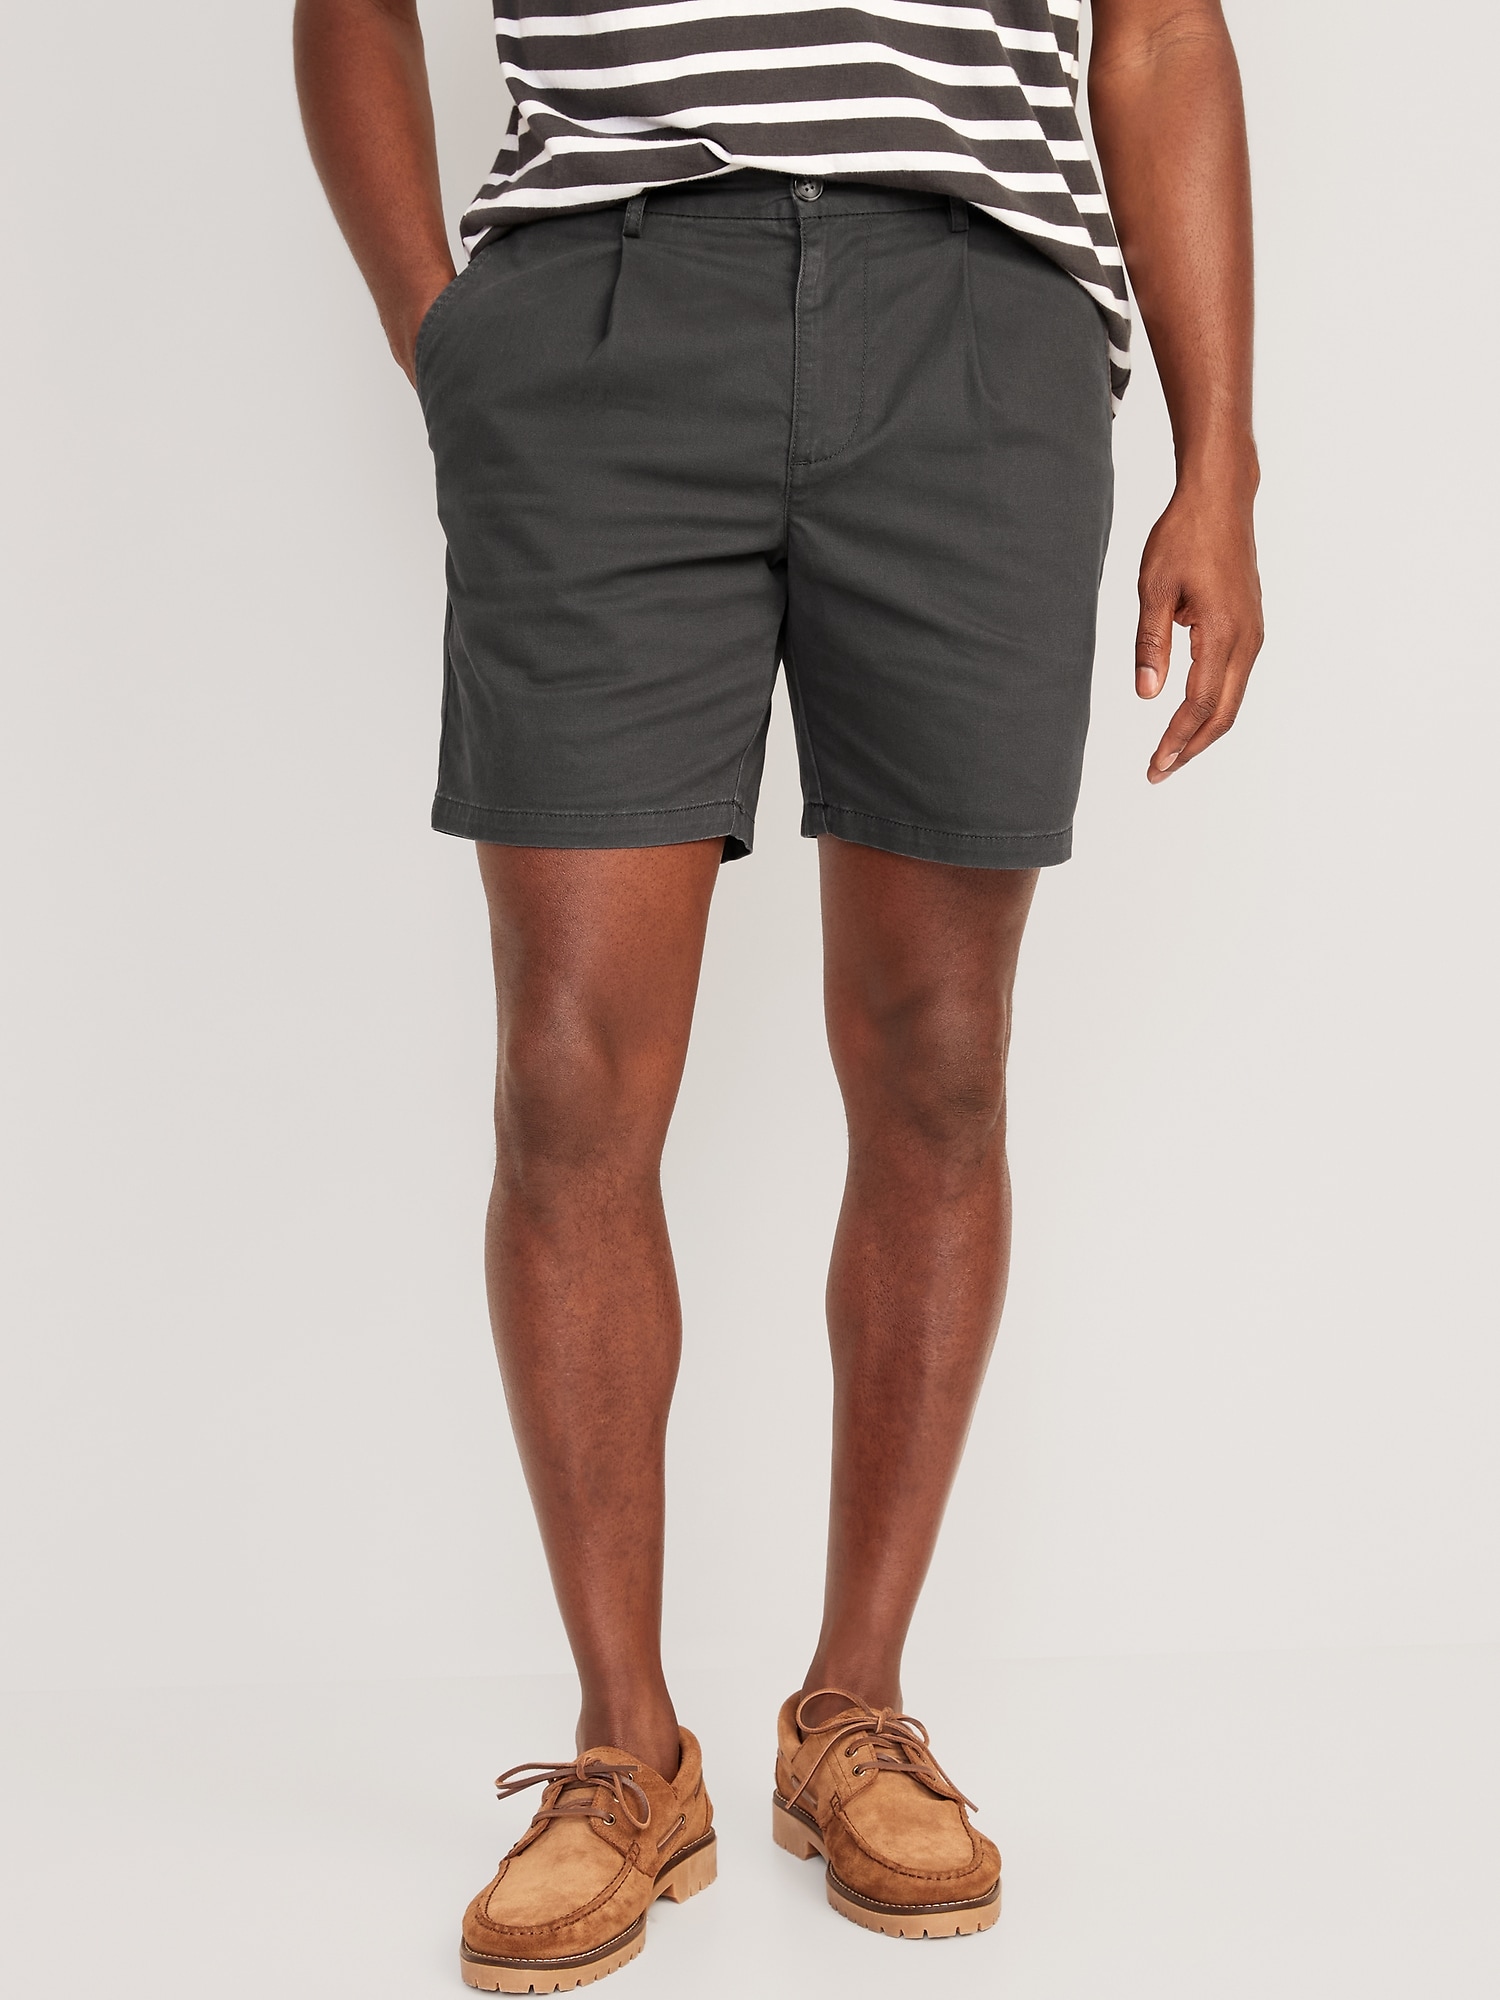 Old Navy Slim Built-In Flex Ultimate Chino Pleated Shorts for Men -- 7-inch inseam black. 1